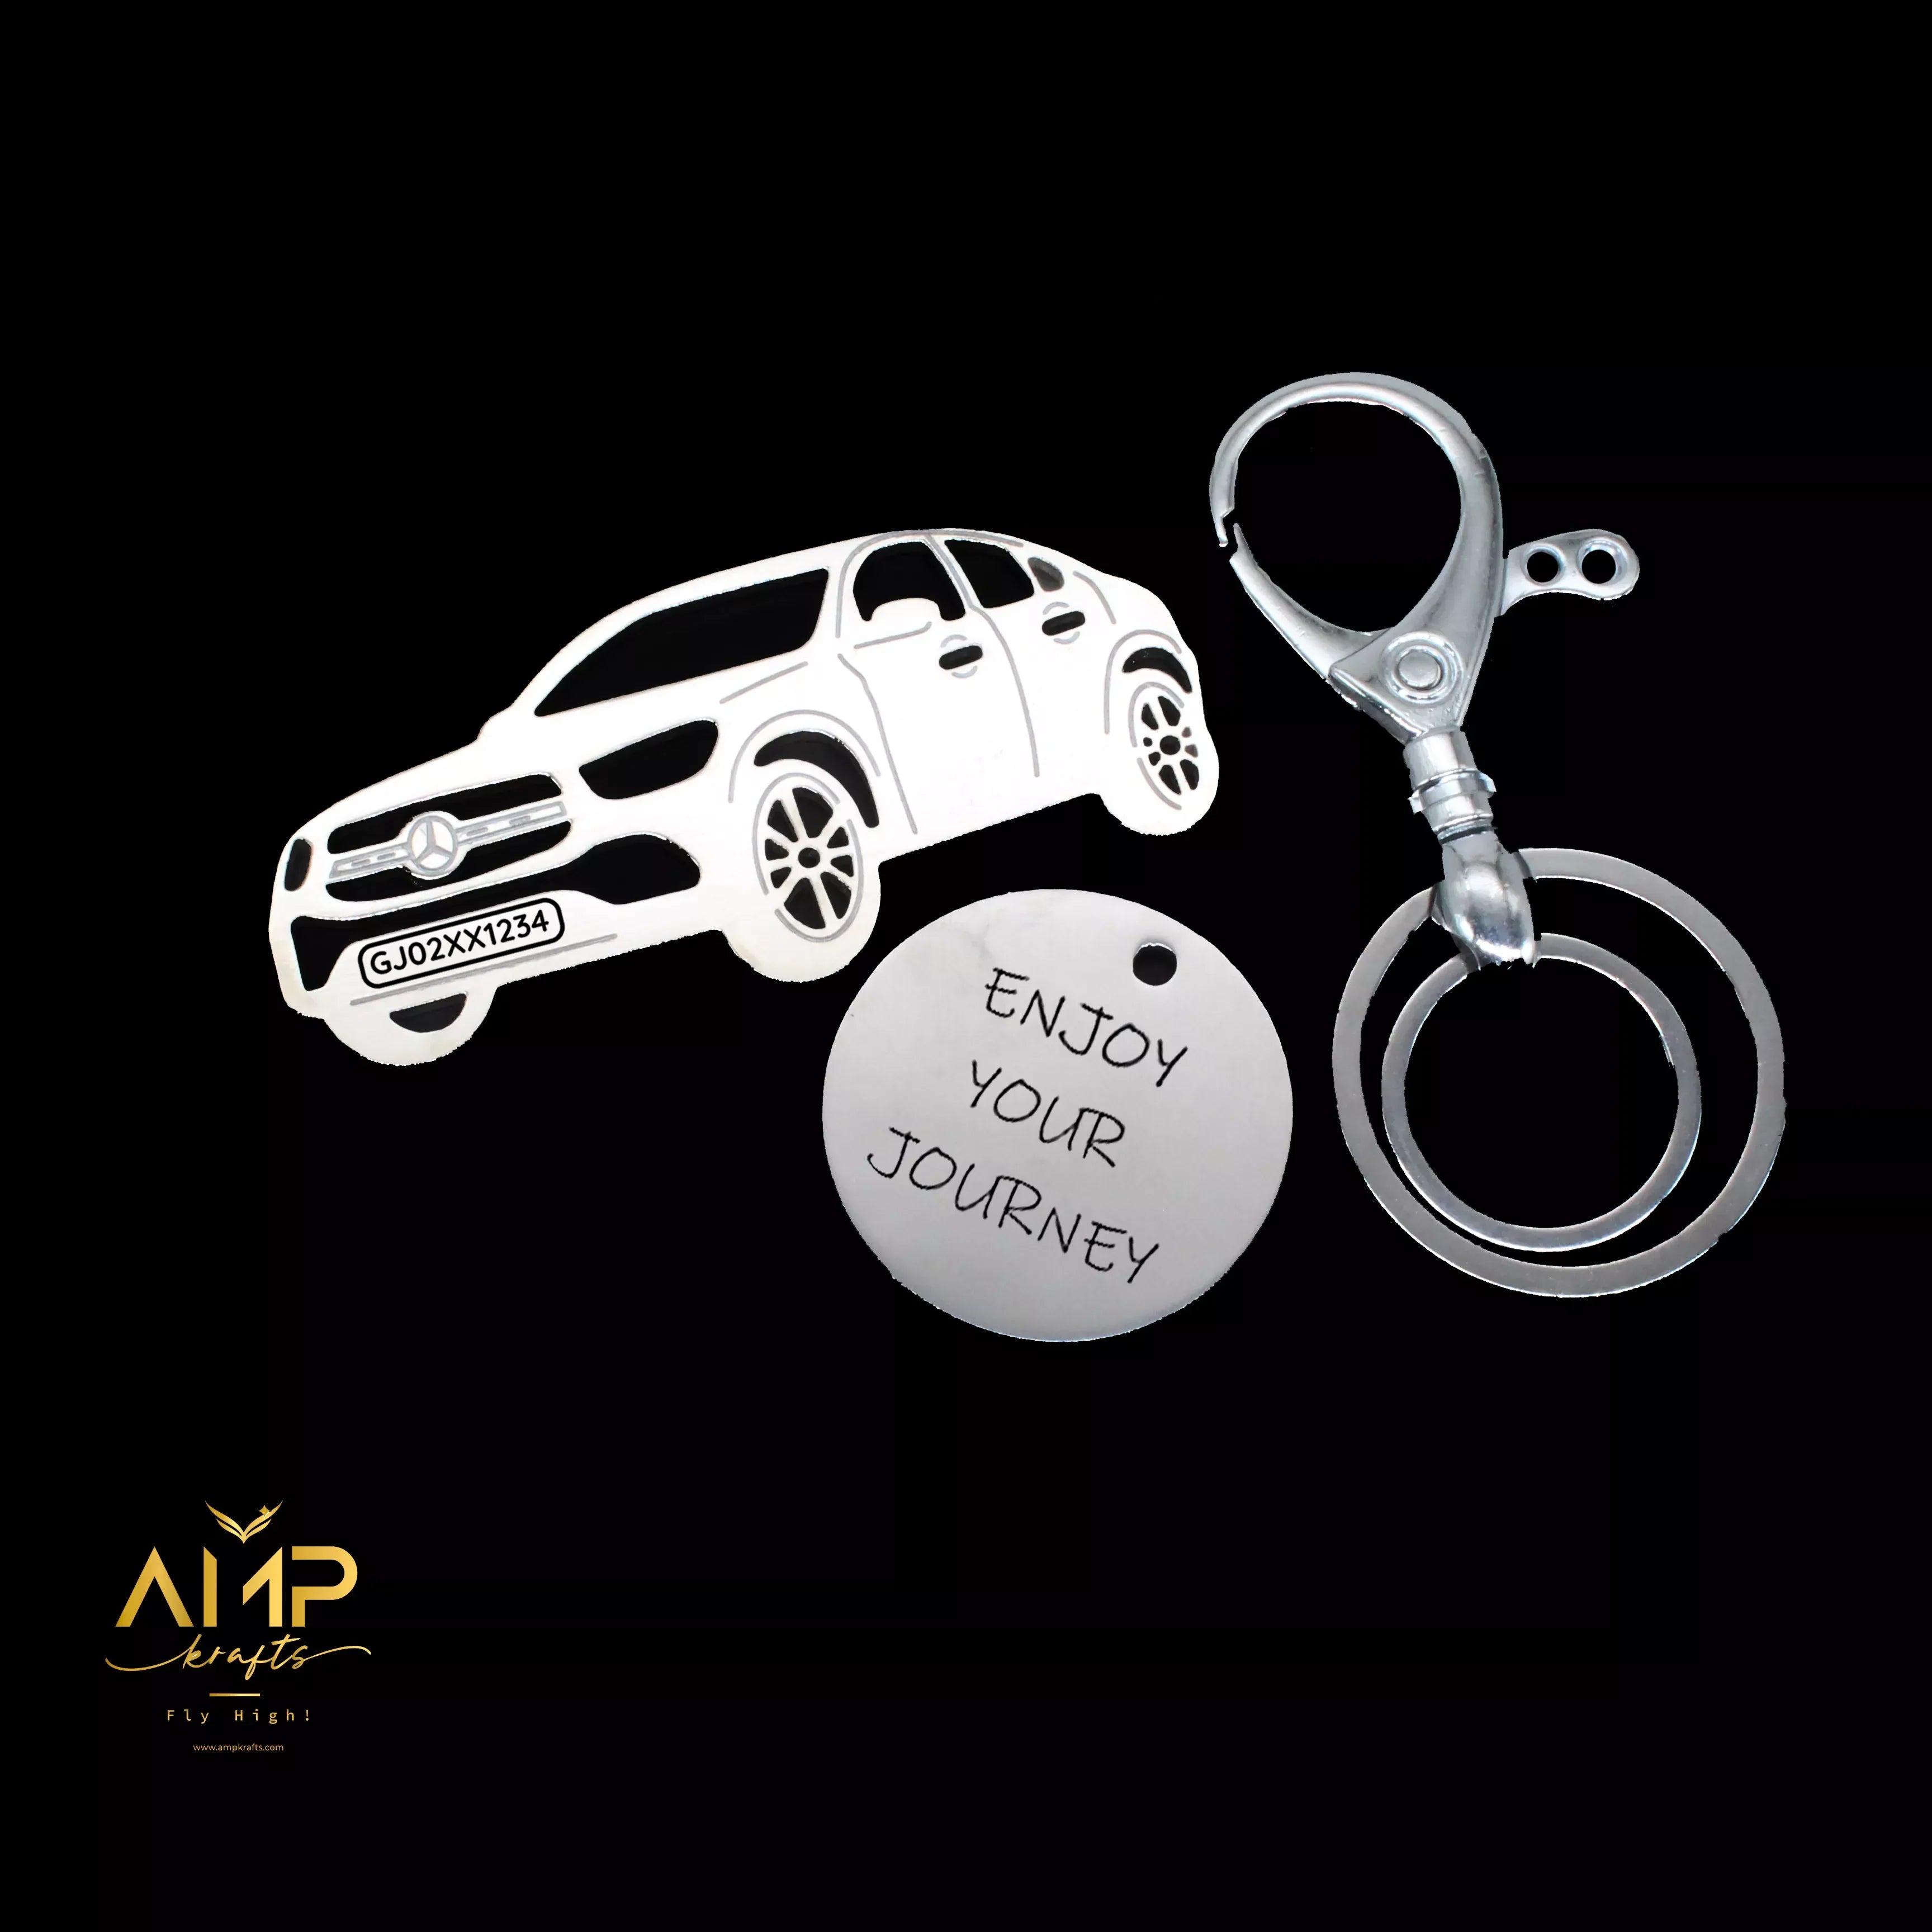 Personalized Name & Number Plate keychain | Mercedes Benz GLC 300 Keychain